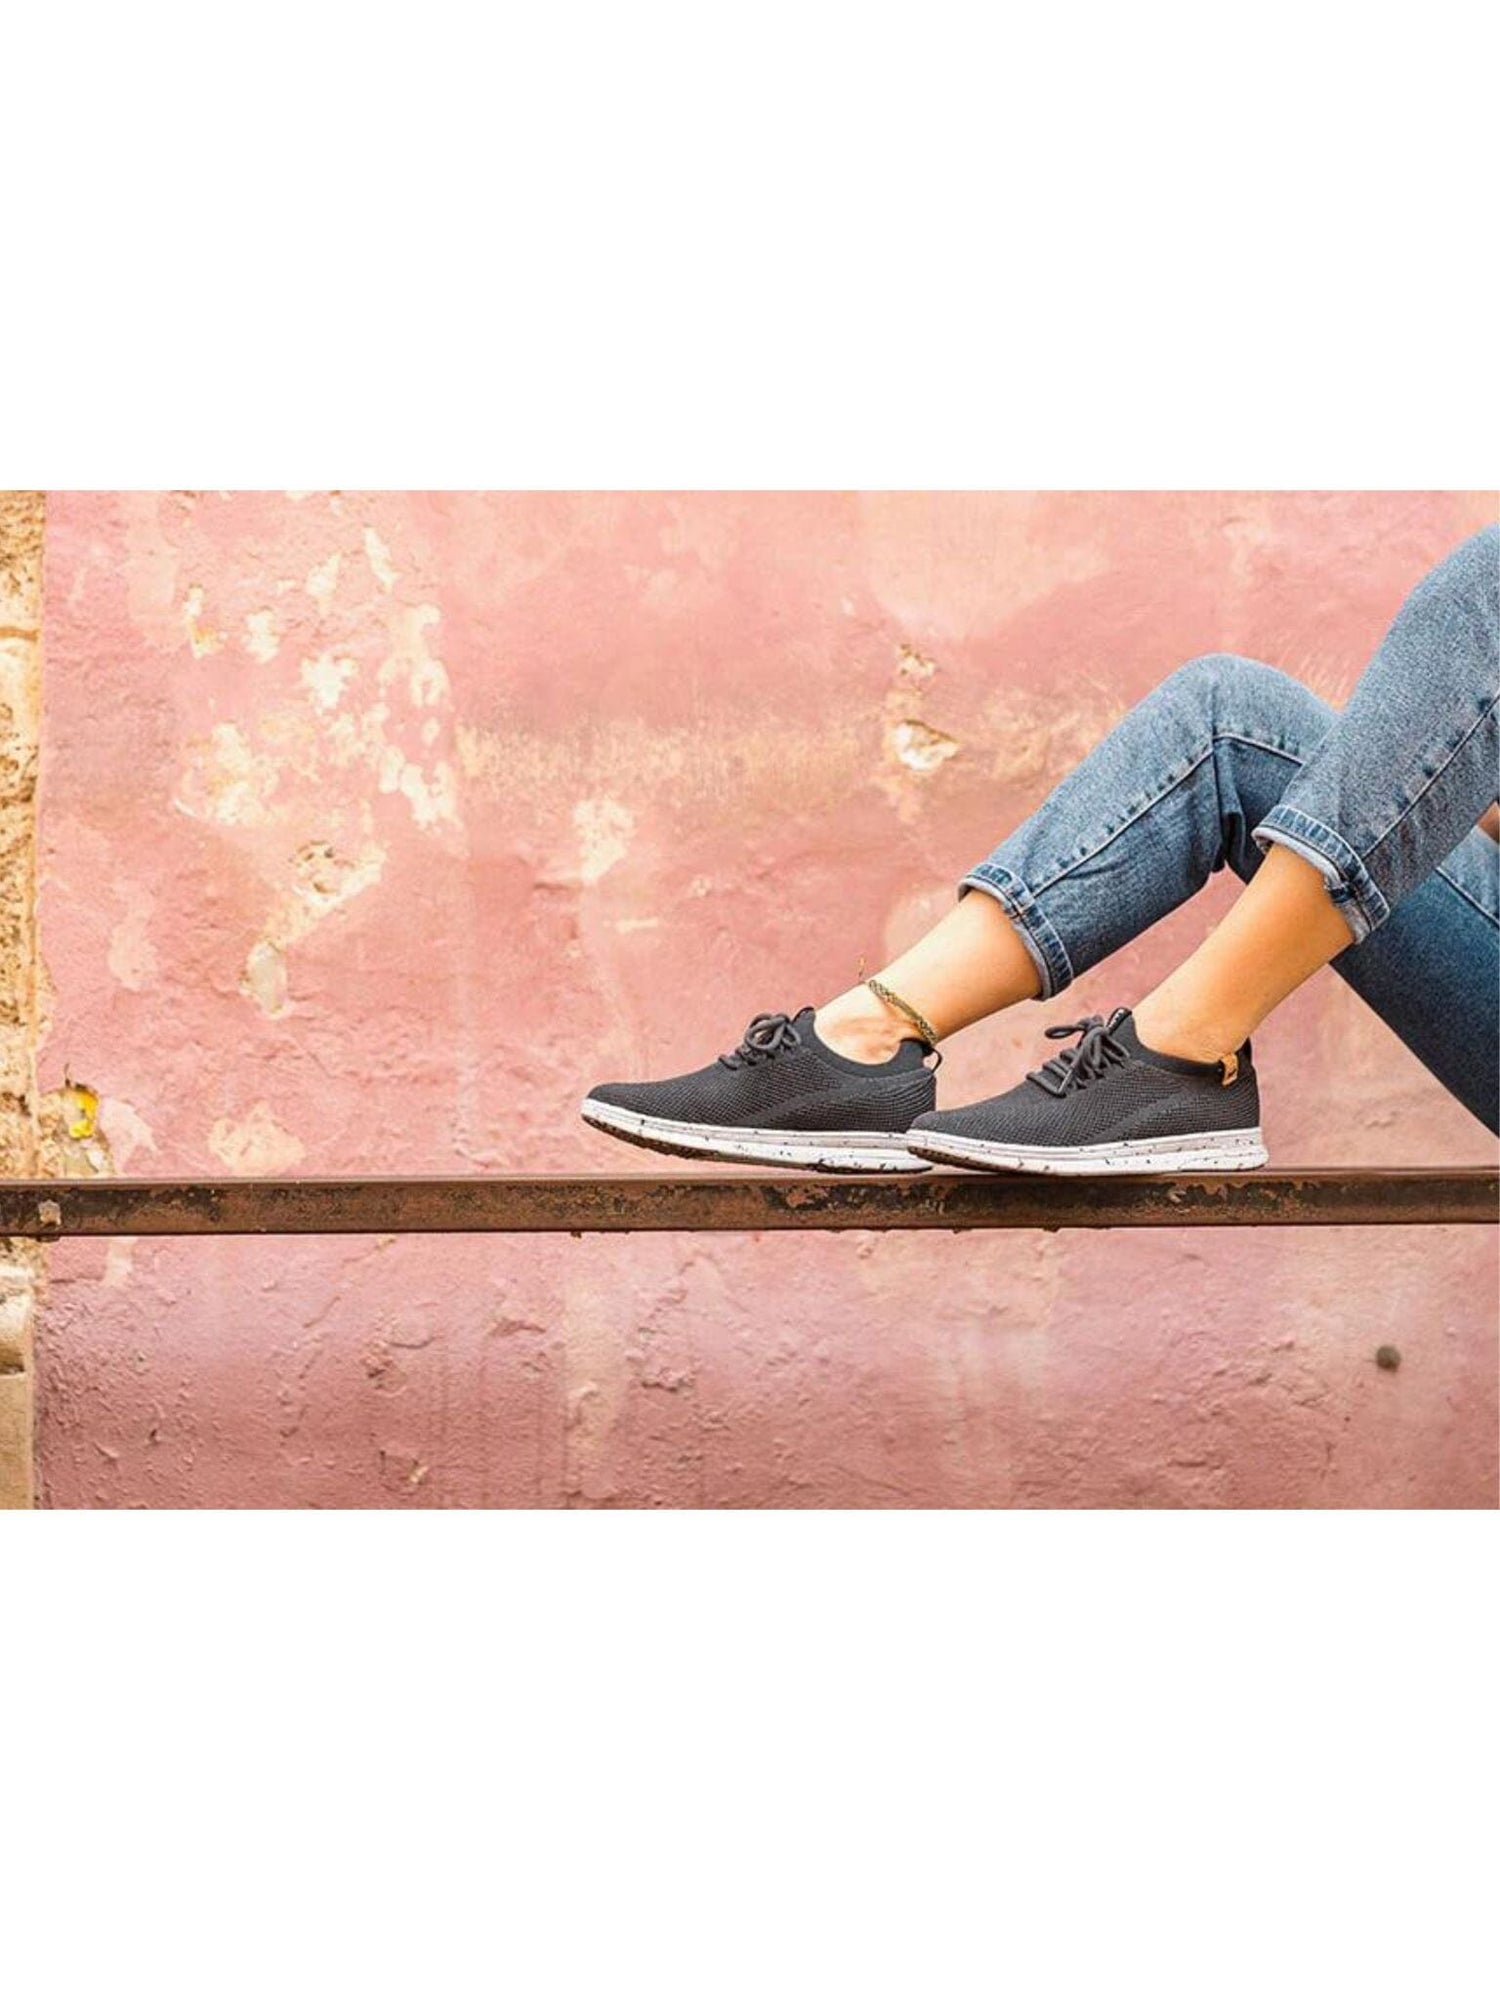 Saola W's Tsavo - 100% Vegan - Recycled and bio-sourced materials Black Shoes